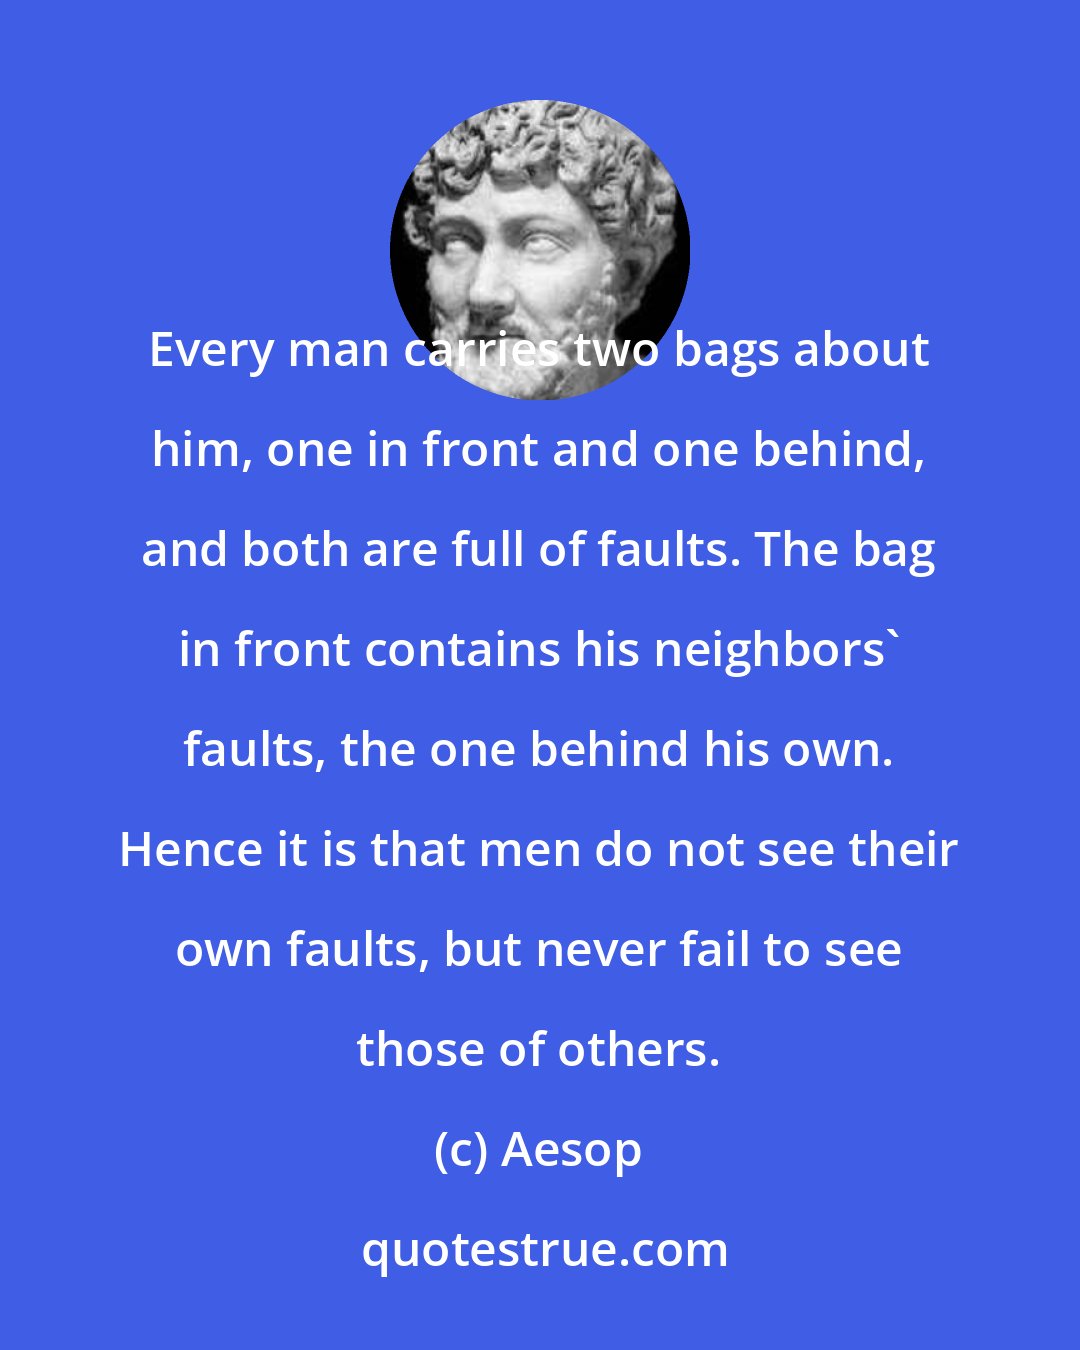 Aesop: Every man carries two bags about him, one in front and one behind, and both are full of faults. The bag in front contains his neighbors' faults, the one behind his own. Hence it is that men do not see their own faults, but never fail to see those of others.